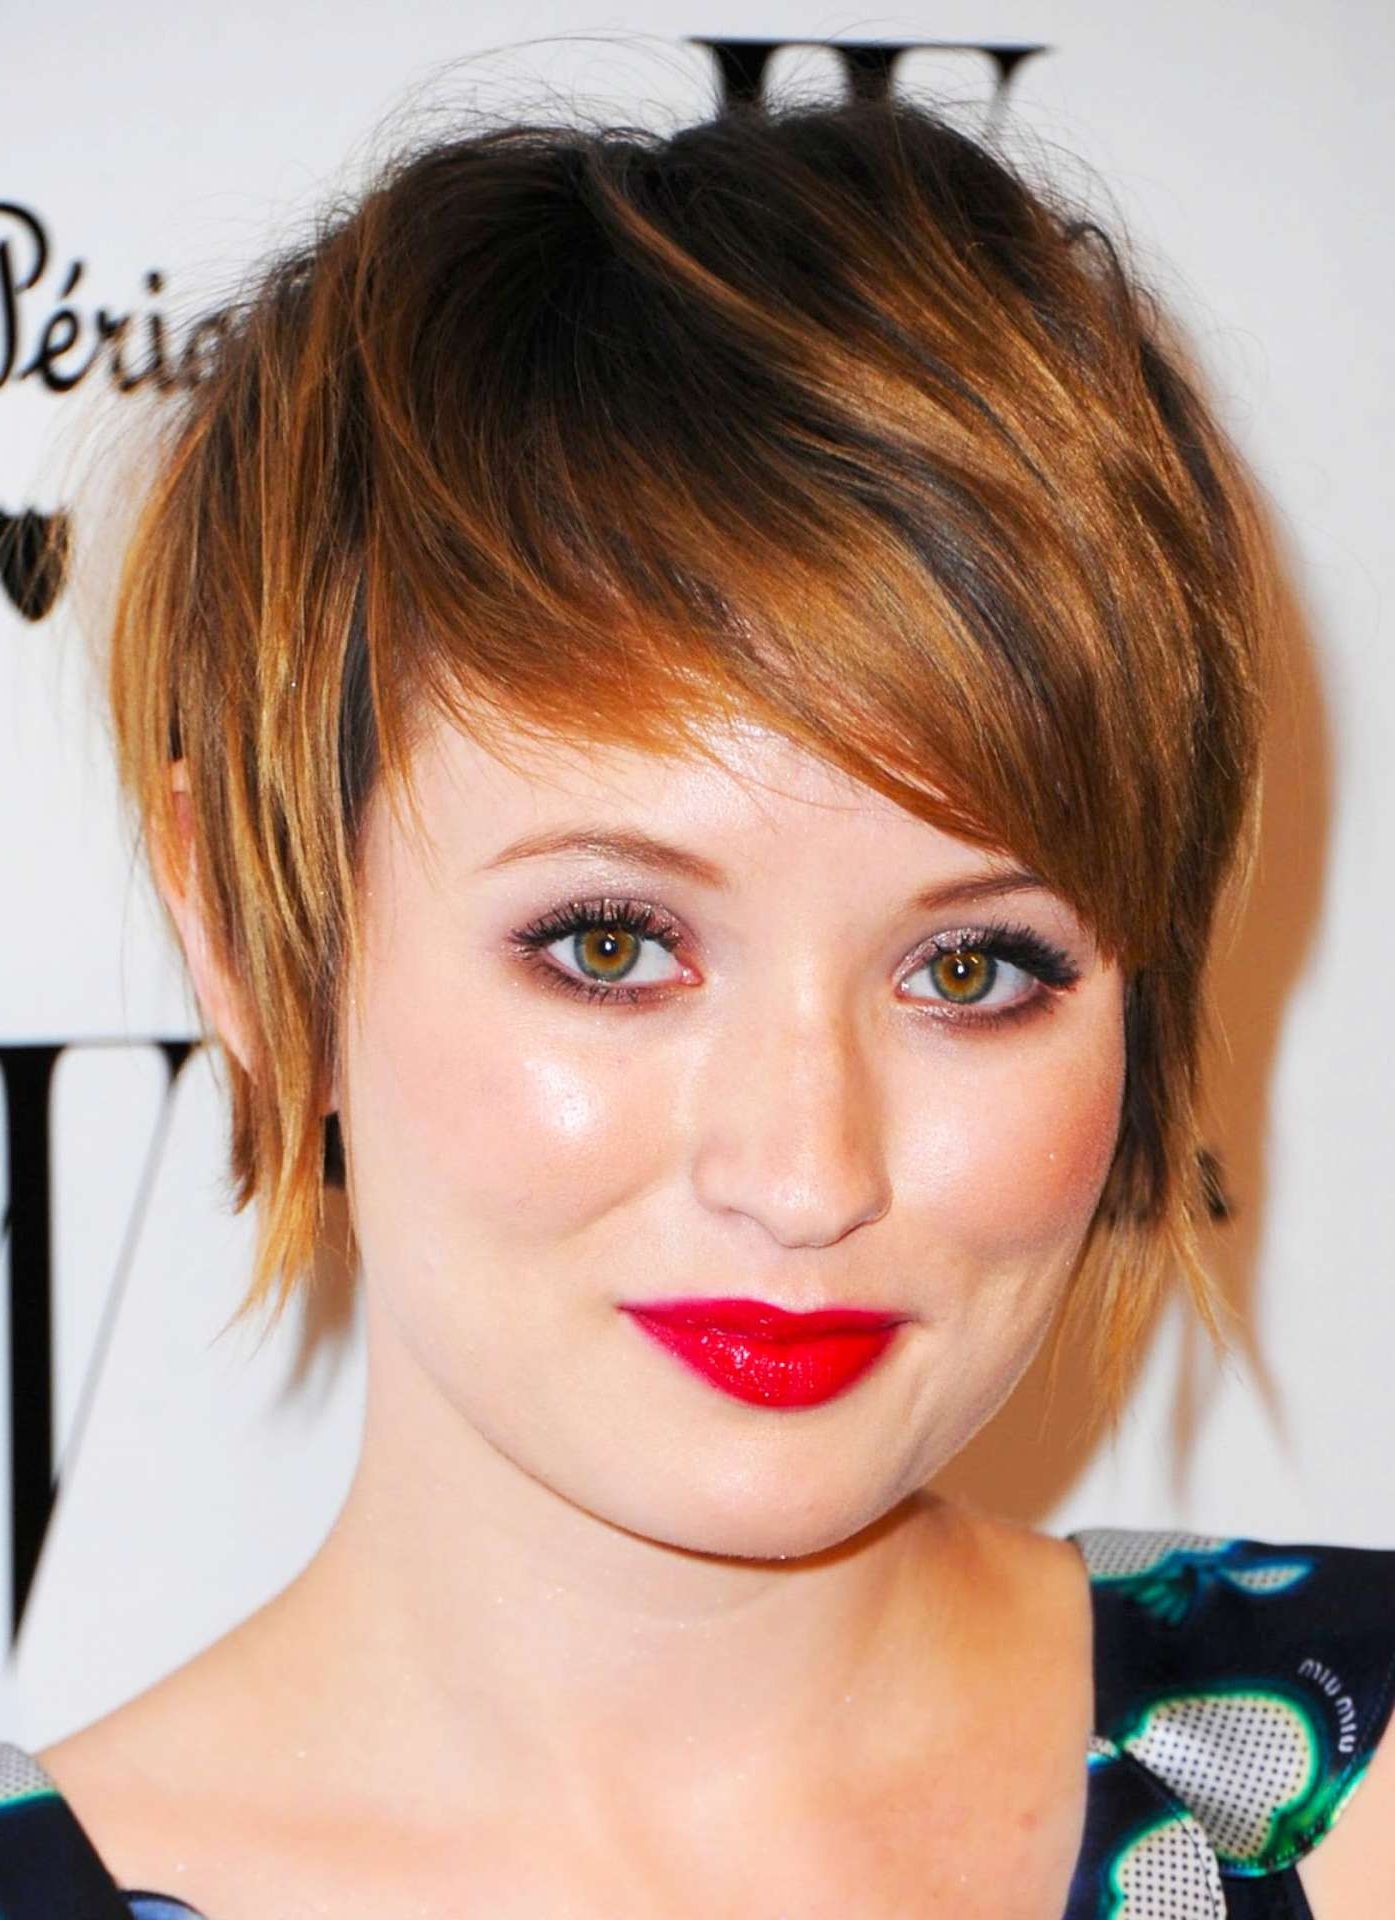 14 Best Short Haircuts For Women With Round Faces Regarding Short Hairstyles For Wide Faces (View 6 of 25)